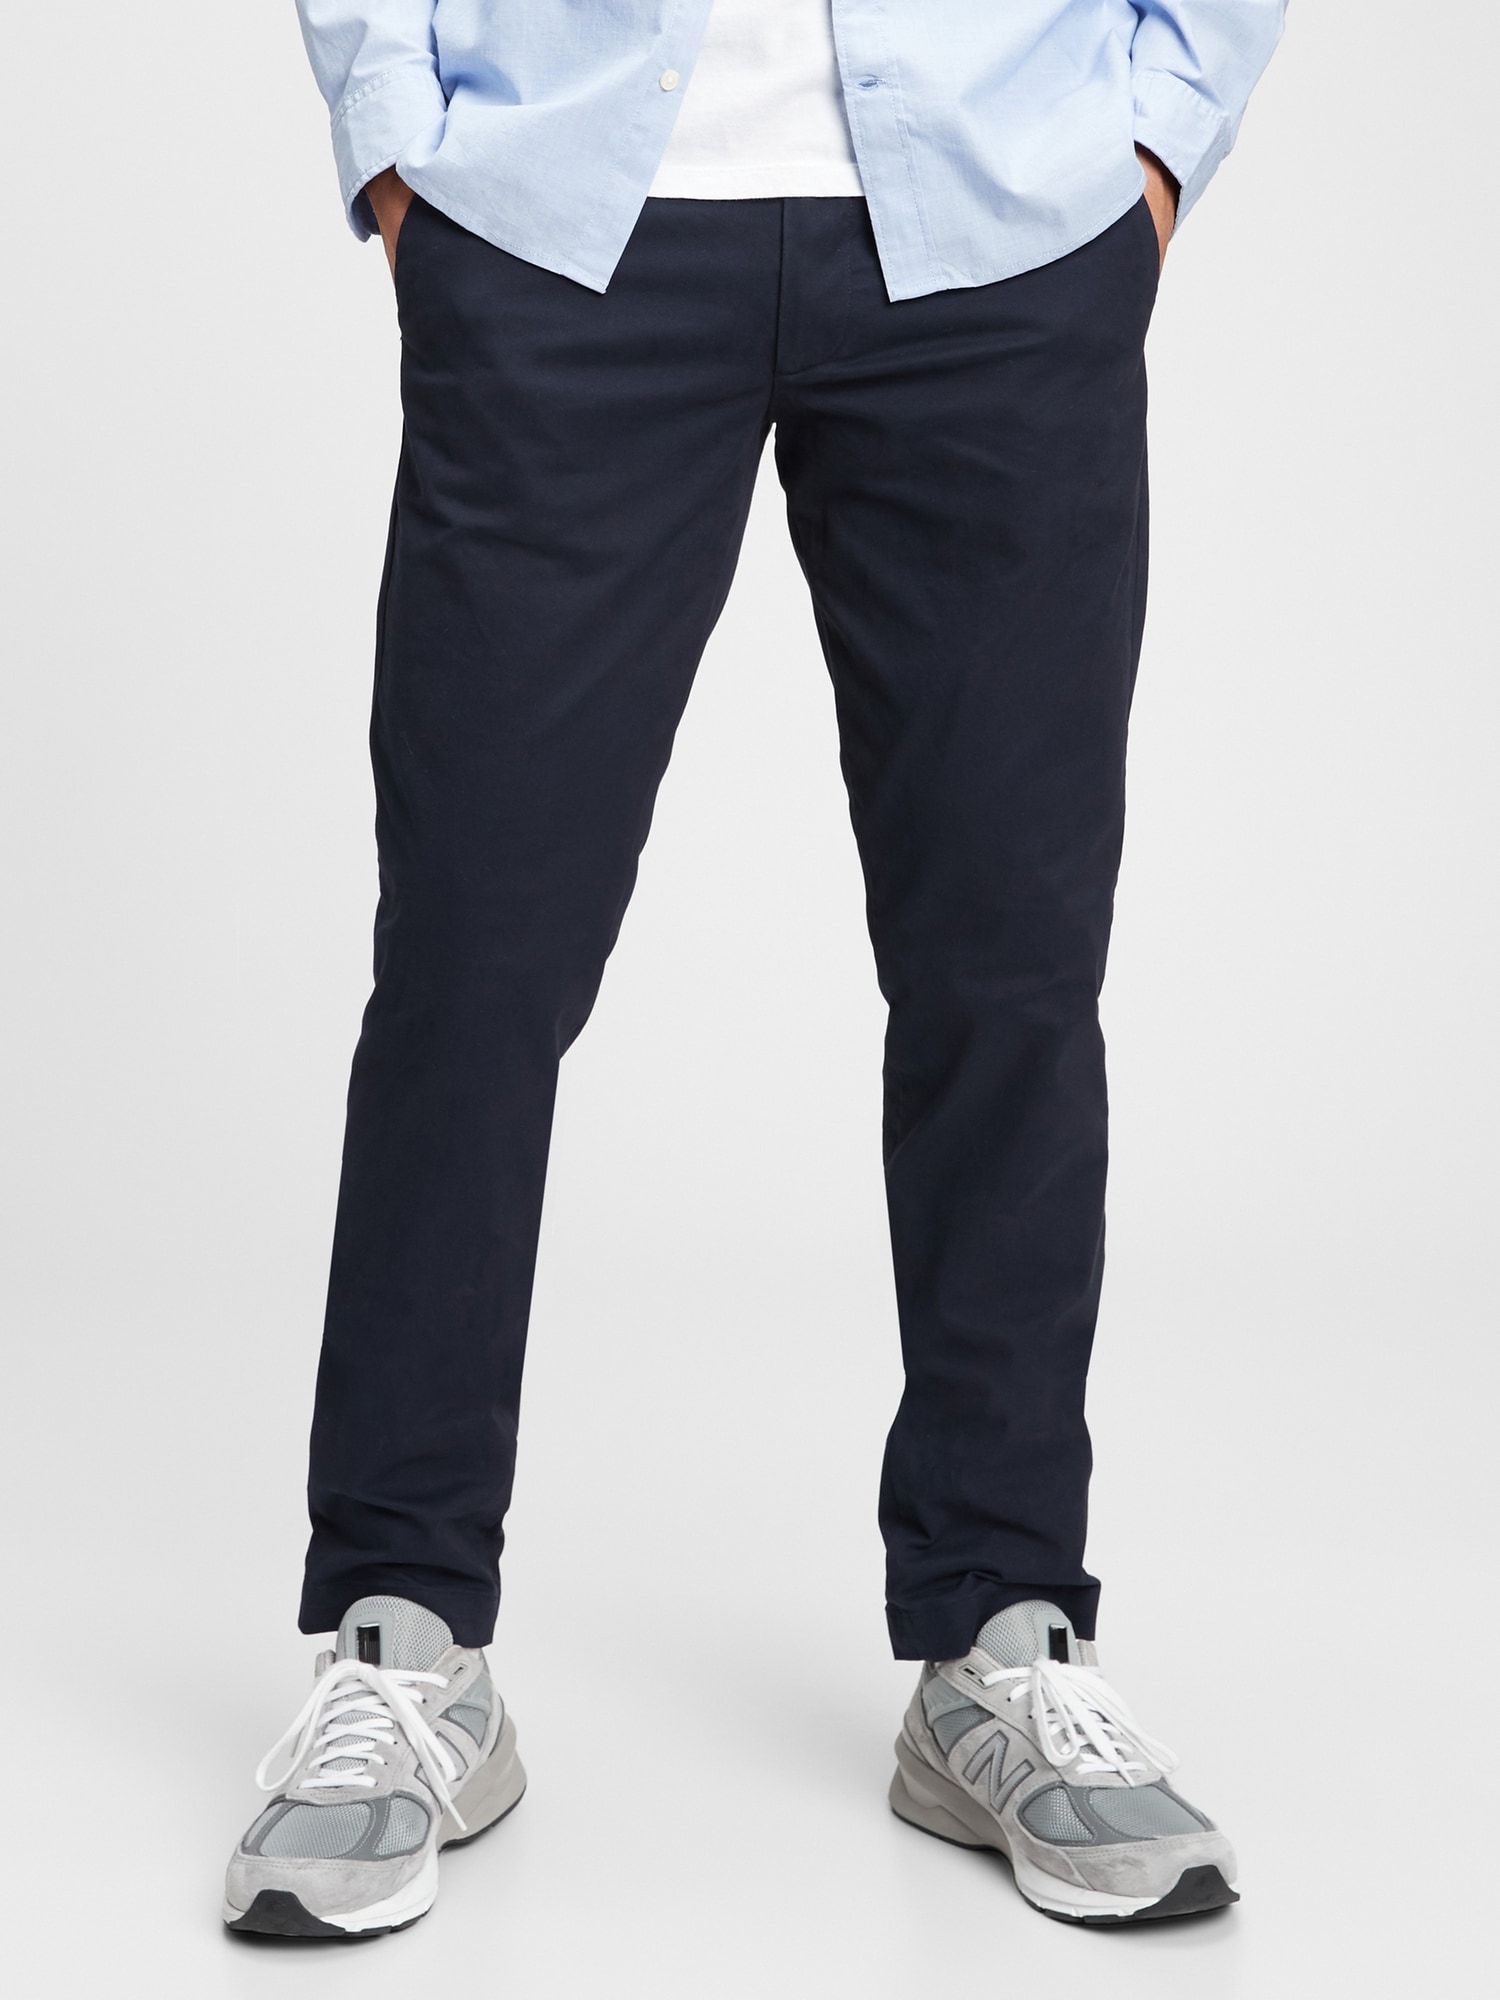 Gap Modern Khakis In Slim Fit With Flex In New Classic Navy Blue